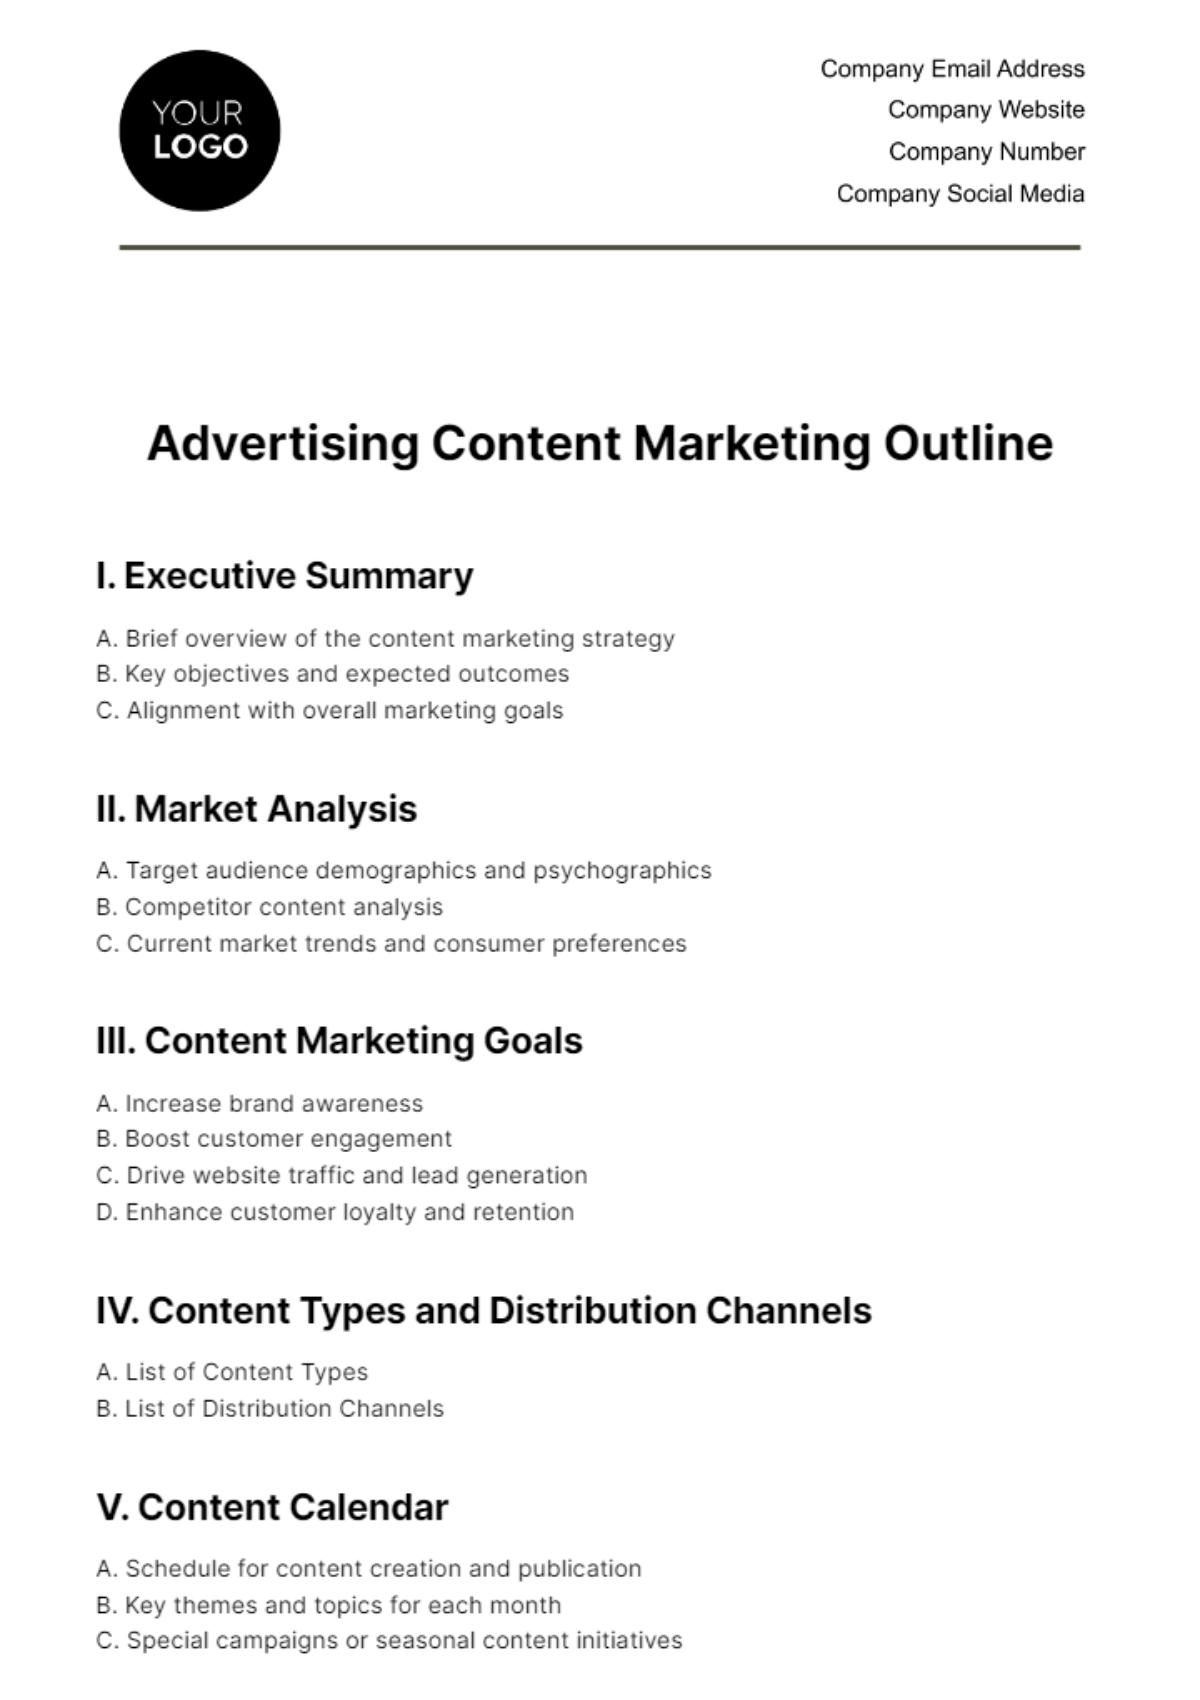 Free Advertising Content Marketing Outline Template